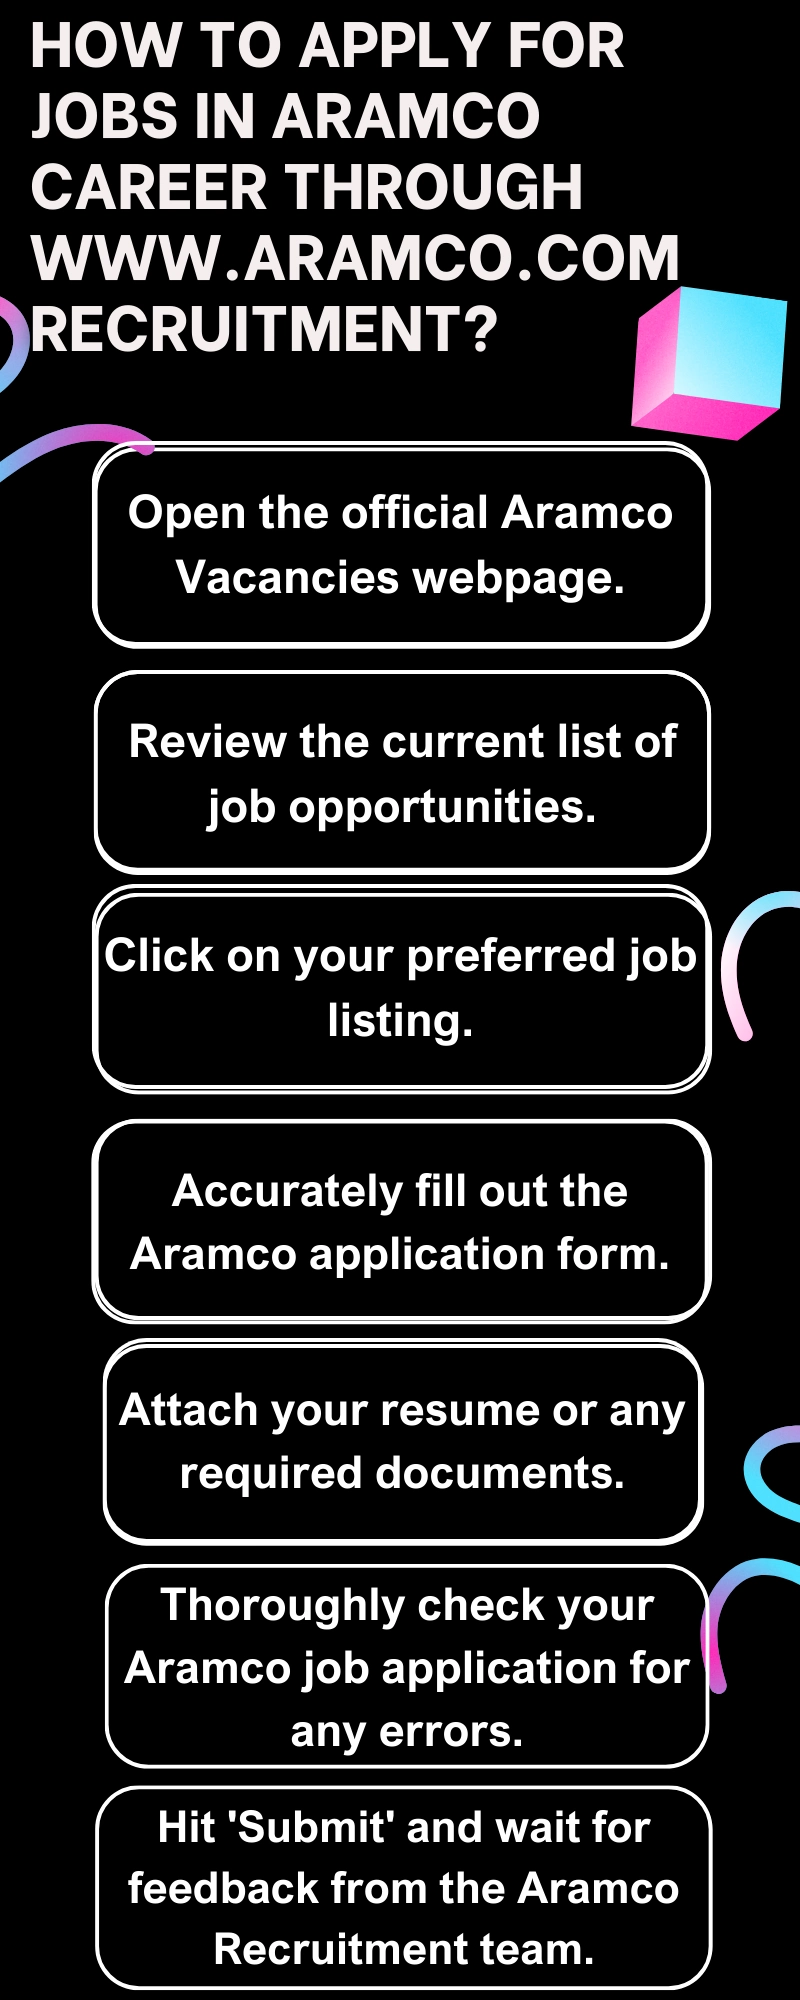 How to Apply for Jobs in Aramco Career through www.aramco.com recruitment?